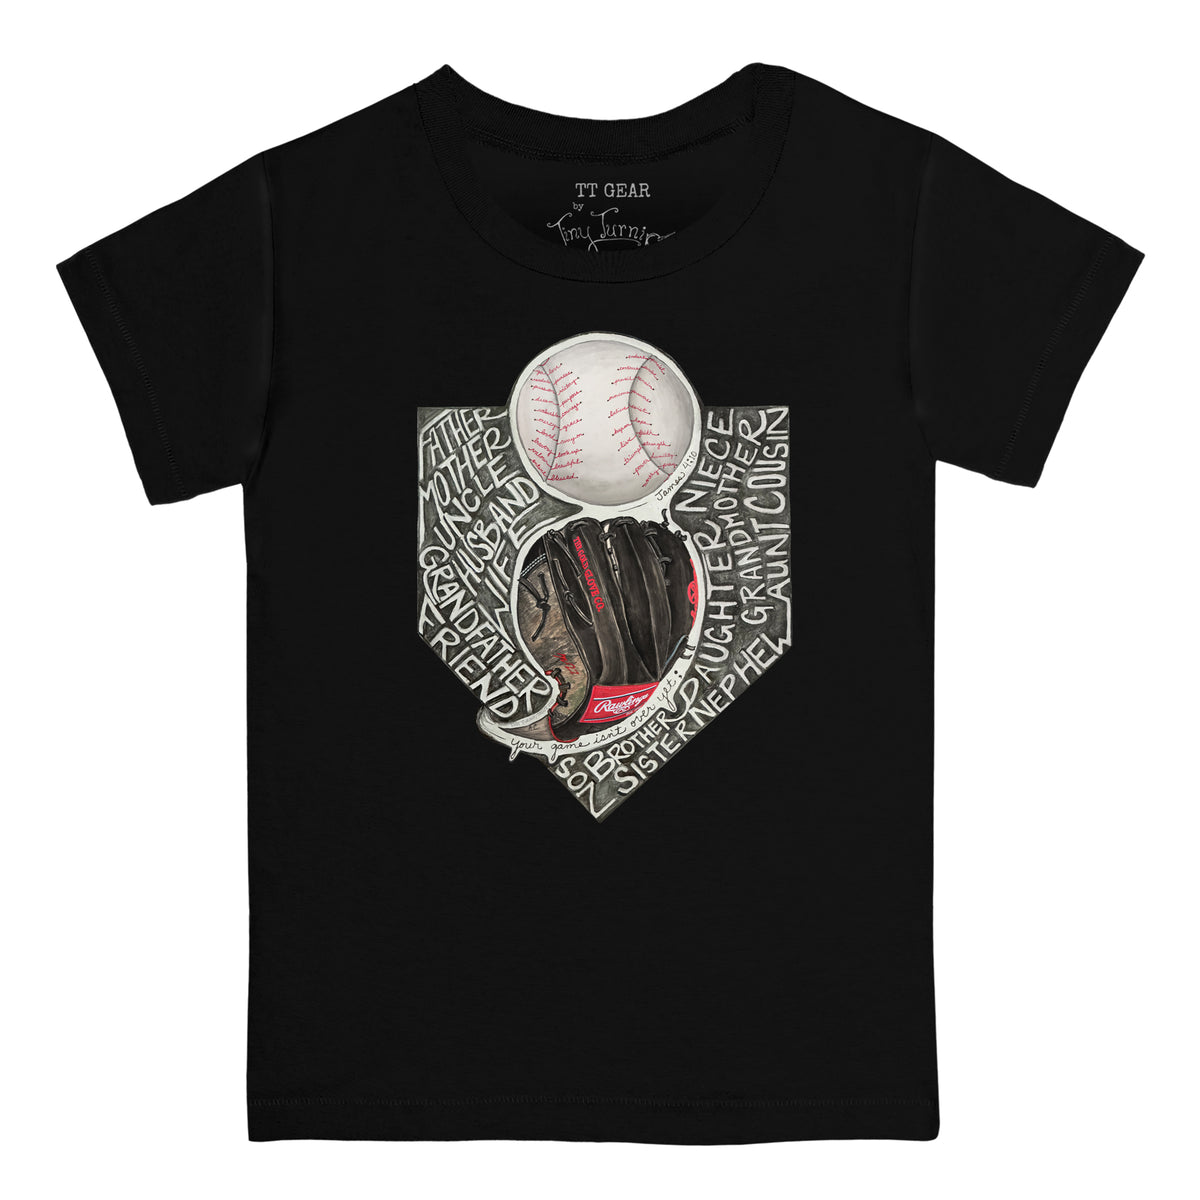 Your Game Isn't Over Yet; Tee Shirt All Sizes